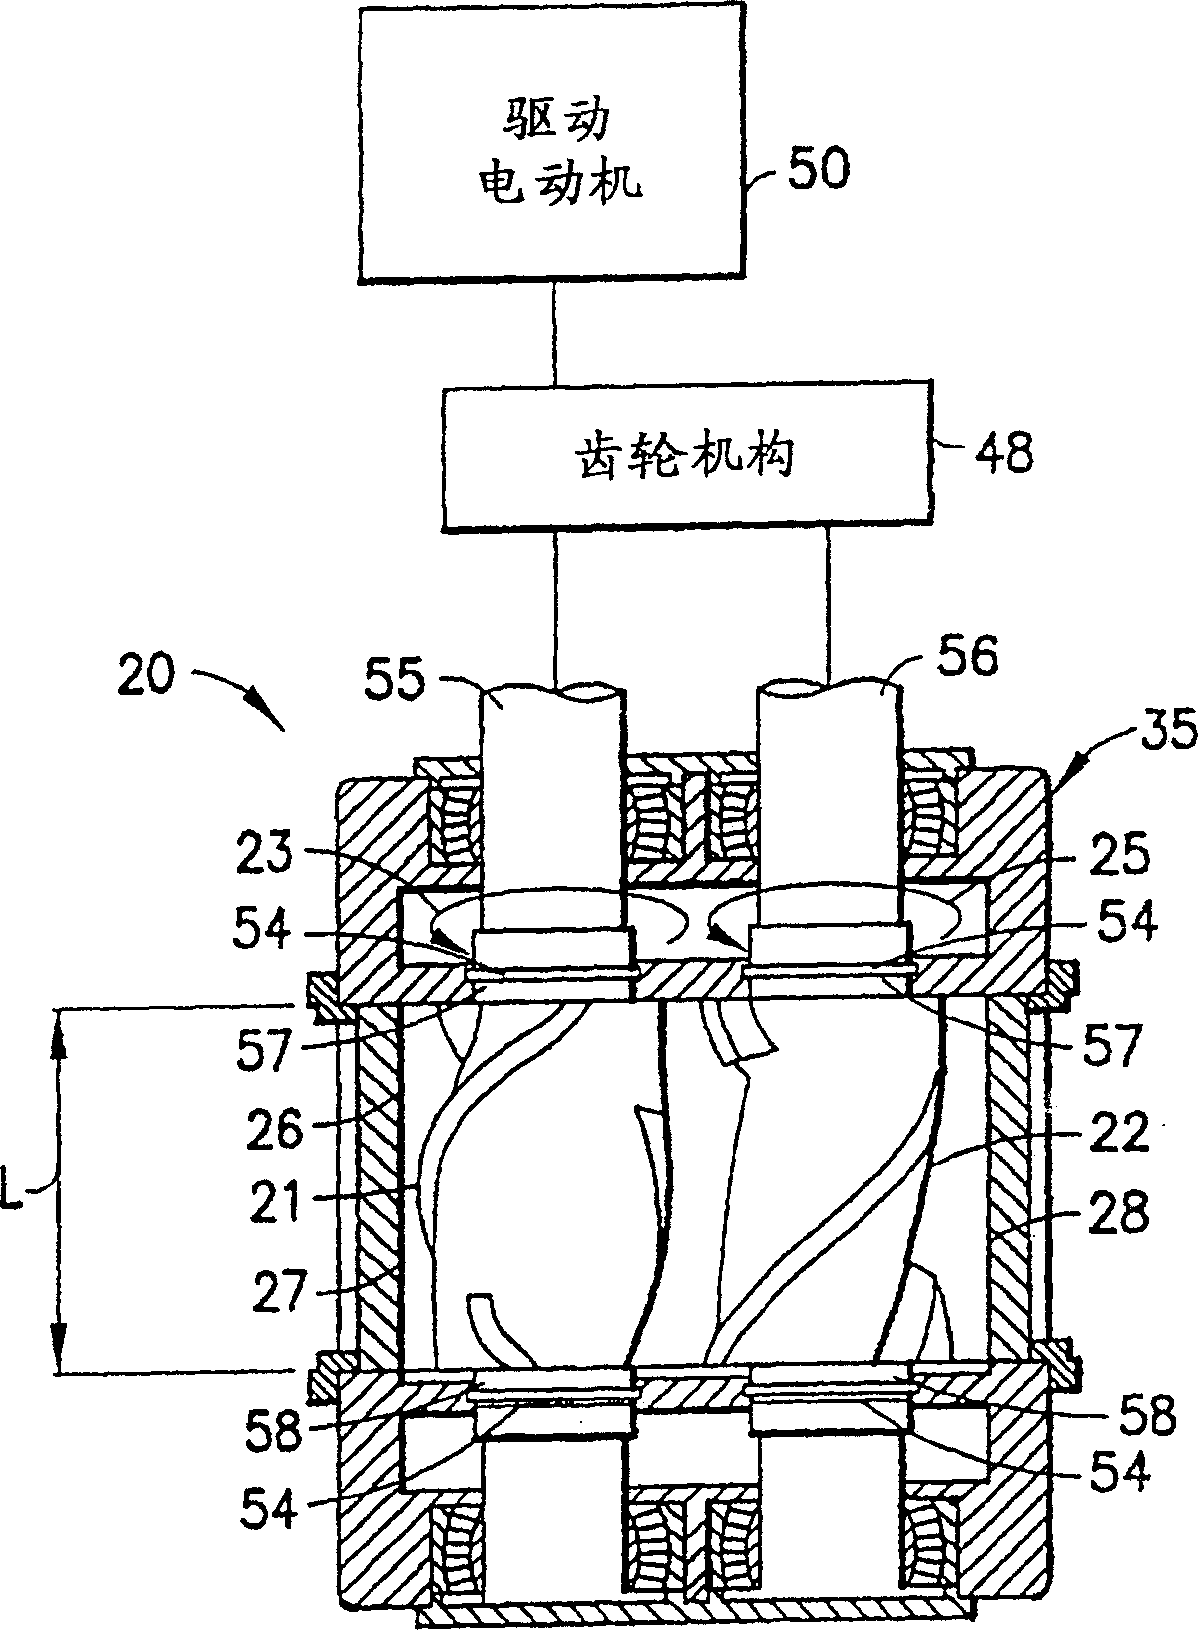 Four wing non-intermeshing mixer rotary drum for synchronous drive and mixer